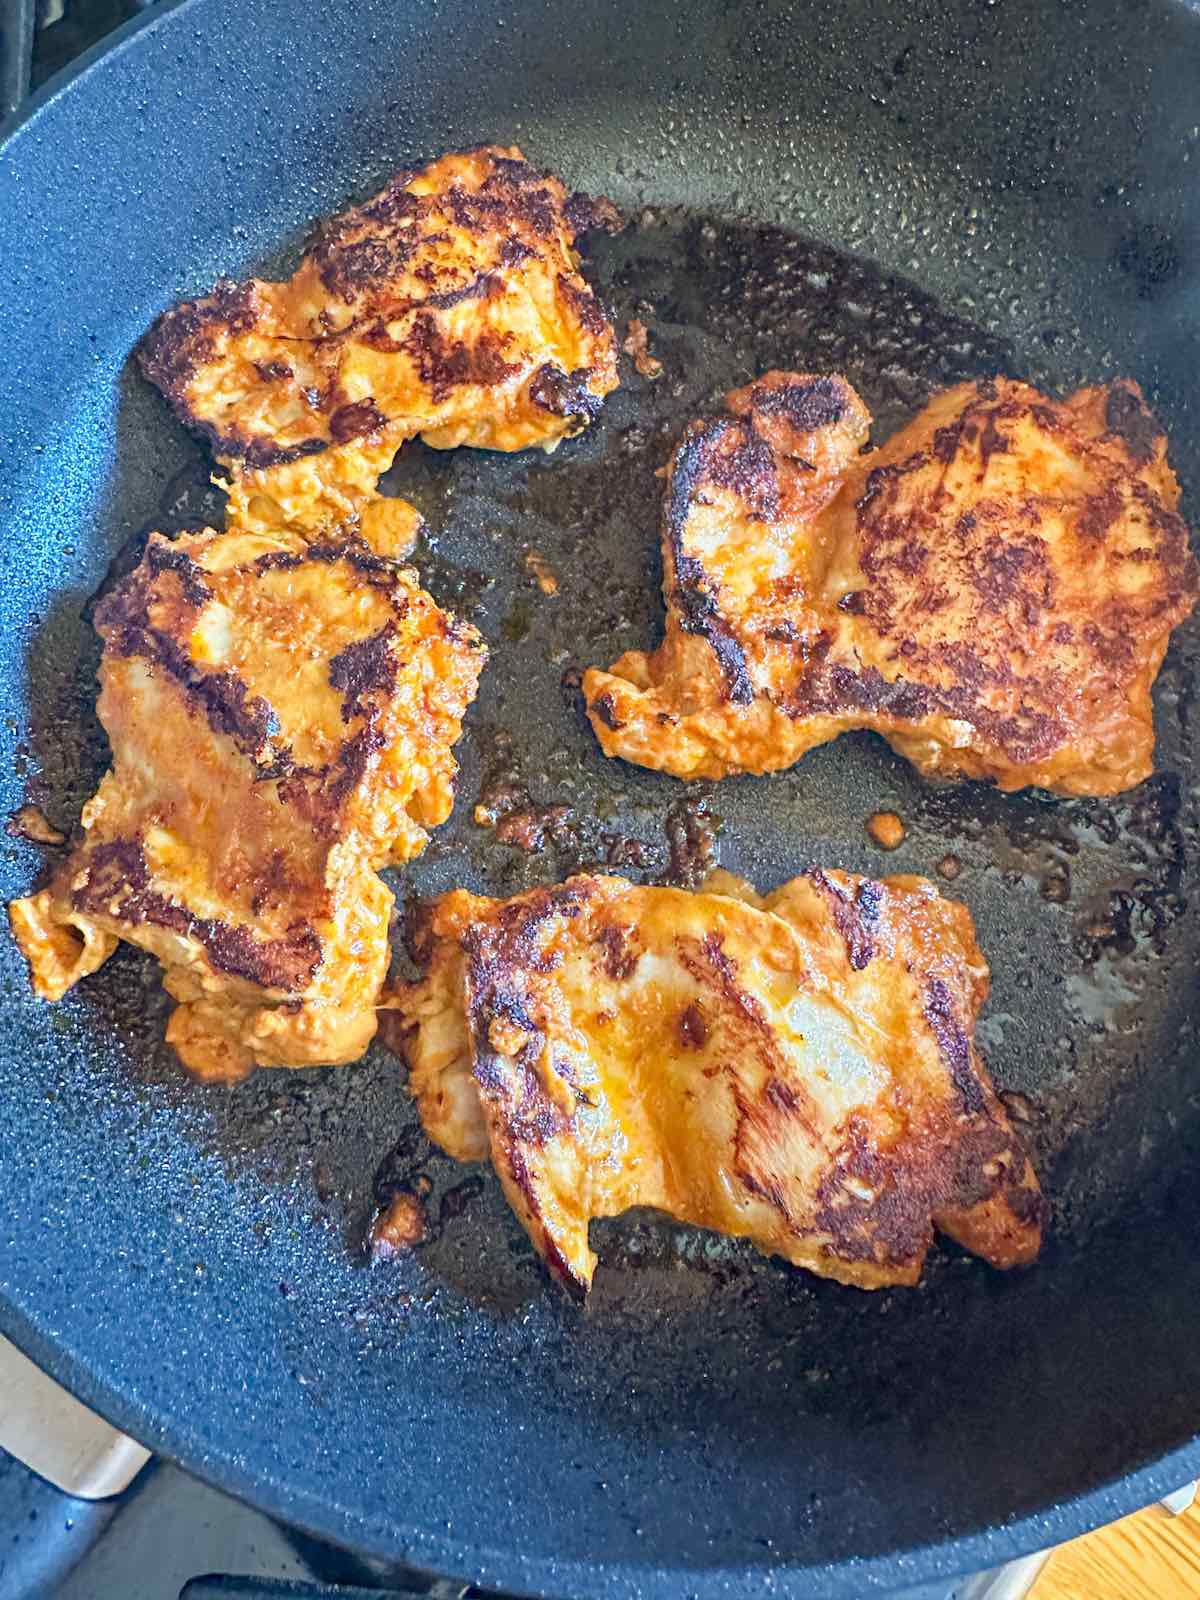 Chipotle chicken thighs in a skillet.